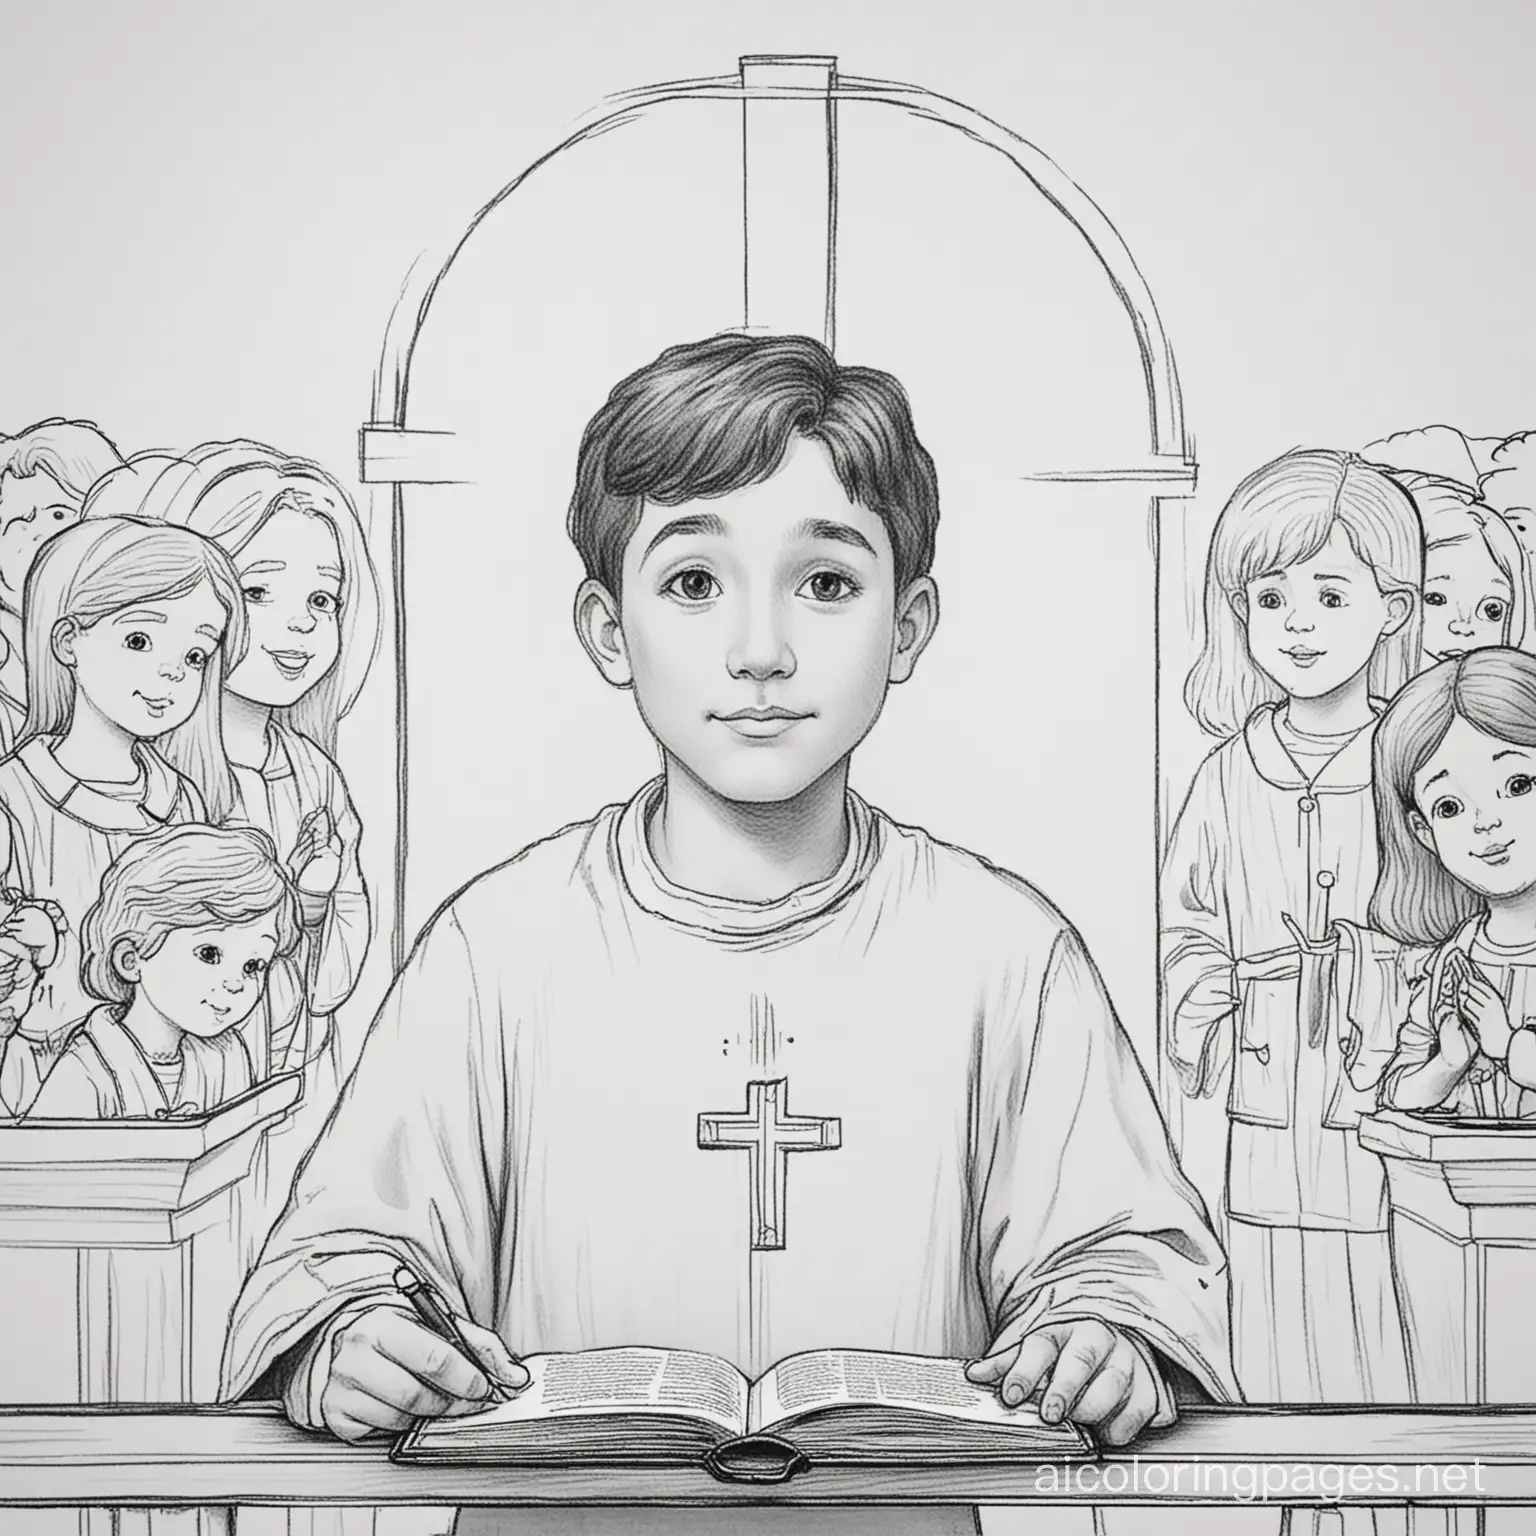 Child-Participating-in-Eucharist-Coloring-Page-Simple-Line-Art-on-White-Background